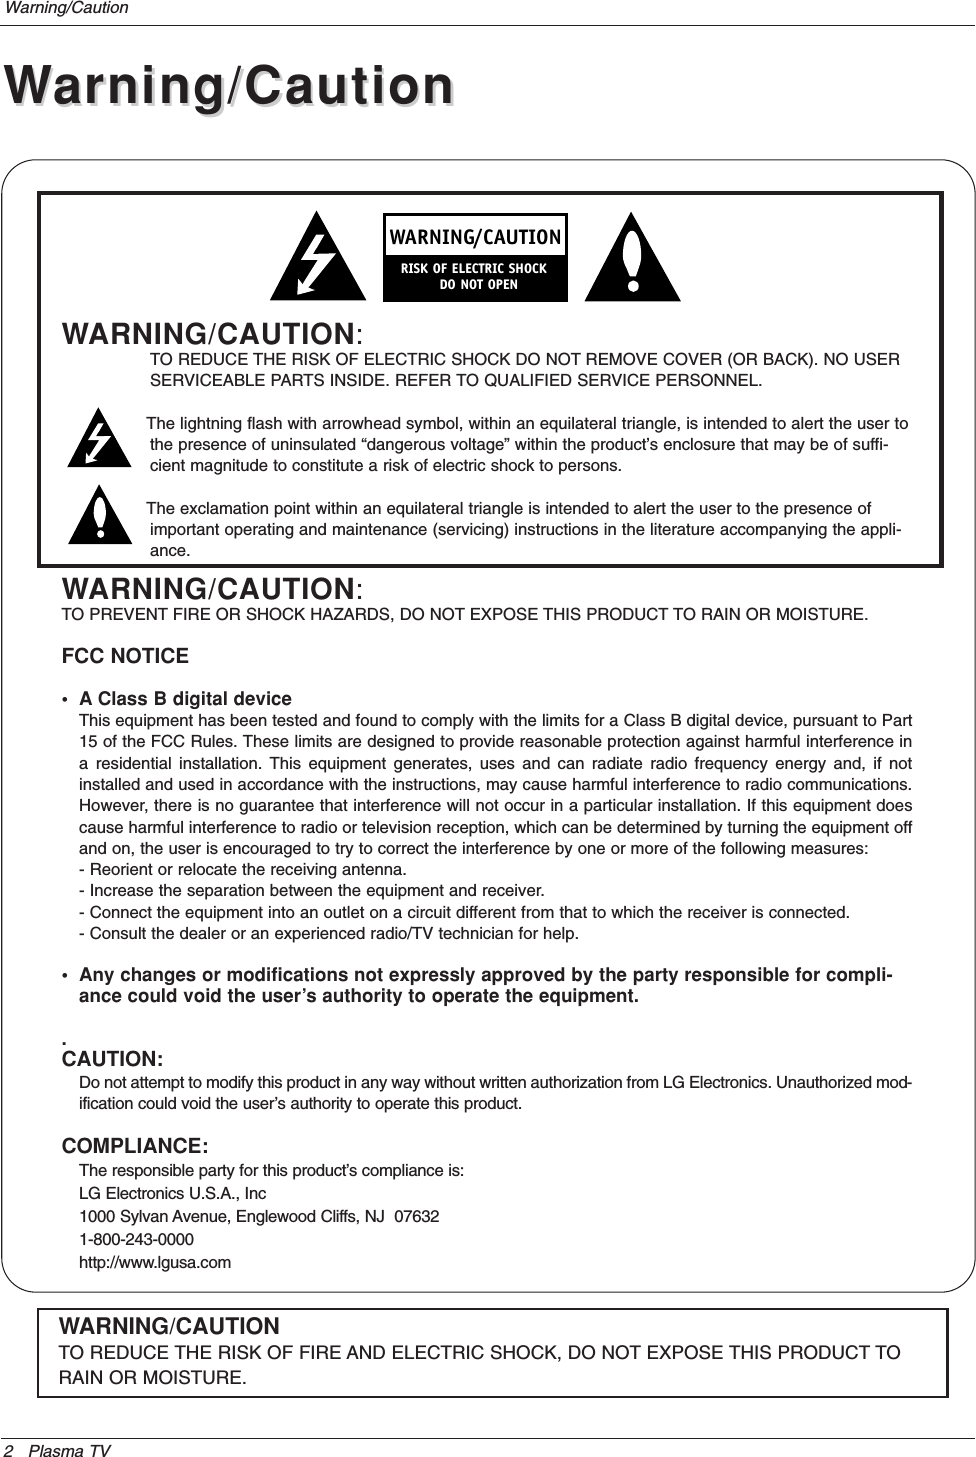 2 Plasma TVWarning/CautionWARNING/CAUTION:TO REDUCE THE RISK OF ELECTRIC SHOCK DO NOT REMOVE COVER (OR BACK). NO USERSERVICEABLE PARTS INSIDE. REFER TO QUALIFIED SERVICE PERSONNEL.The lightning flash with arrowhead symbol, within an equilateral triangle, is intended to alert the user tothe presence of uninsulated “dangerous voltage” within the product’s enclosure that may be of suffi-cient magnitude to constitute a risk of electric shock to persons.The exclamation point within an equilateral triangle is intended to alert the user to the presence ofimportant operating and maintenance (servicing) instructions in the literature accompanying the appli-ance.WARNING/CAUTION:TO PREVENT FIRE OR SHOCK HAZARDS, DO NOT EXPOSE THIS PRODUCT TO RAIN OR MOISTURE.FCC NOTICE• A Class B digital deviceThis equipment has been tested and found to comply with the limits for a Class B digital device, pursuant to Part15 of the FCC Rules. These limits are designed to provide reasonable protection against harmful interference ina residential installation. This equipment generates, uses and can radiate radio frequency energy and, if notinstalled and used in accordance with the instructions, may cause harmful interference to radio communications.However, there is no guarantee that interference will not occur in a particular installation. If this equipment doescause harmful interference to radio or television reception, which can be determined by turning the equipment offand on, the user is encouraged to try to correct the interference by one or more of the following measures:- Reorient or relocate the receiving antenna.- Increase the separation between the equipment and receiver.- Connect the equipment into an outlet on a circuit different from that to which the receiver is connected.- Consult the dealer or an experienced radio/TV technician for help.• Any changes or modifications not expressly approved by the party responsible for compli-ance could void the user’s authority to operate the equipment..CAUTION:Do not attempt to modify this product in any way without written authorization from LG Electronics. Unauthorized mod-ification could void the user’s authority to operate this product.COMPLIANCE:The responsible party for this product’s compliance is:LG Electronics U.S.A., Inc1000 Sylvan Avenue, Englewood Cliffs, NJ  076321-800-243-0000http://www.lgusa.comWARNINGRISK OF ELECTRIC SHOCK        DO NOT OPEN/CAUTIONWARNING/CAUTIONTO REDUCE THE RISK OF FIRE AND ELECTRIC SHOCK, DO NOT EXPOSE THIS PRODUCT TORAIN OR MOISTURE.WWarning/Cautionarning/Caution